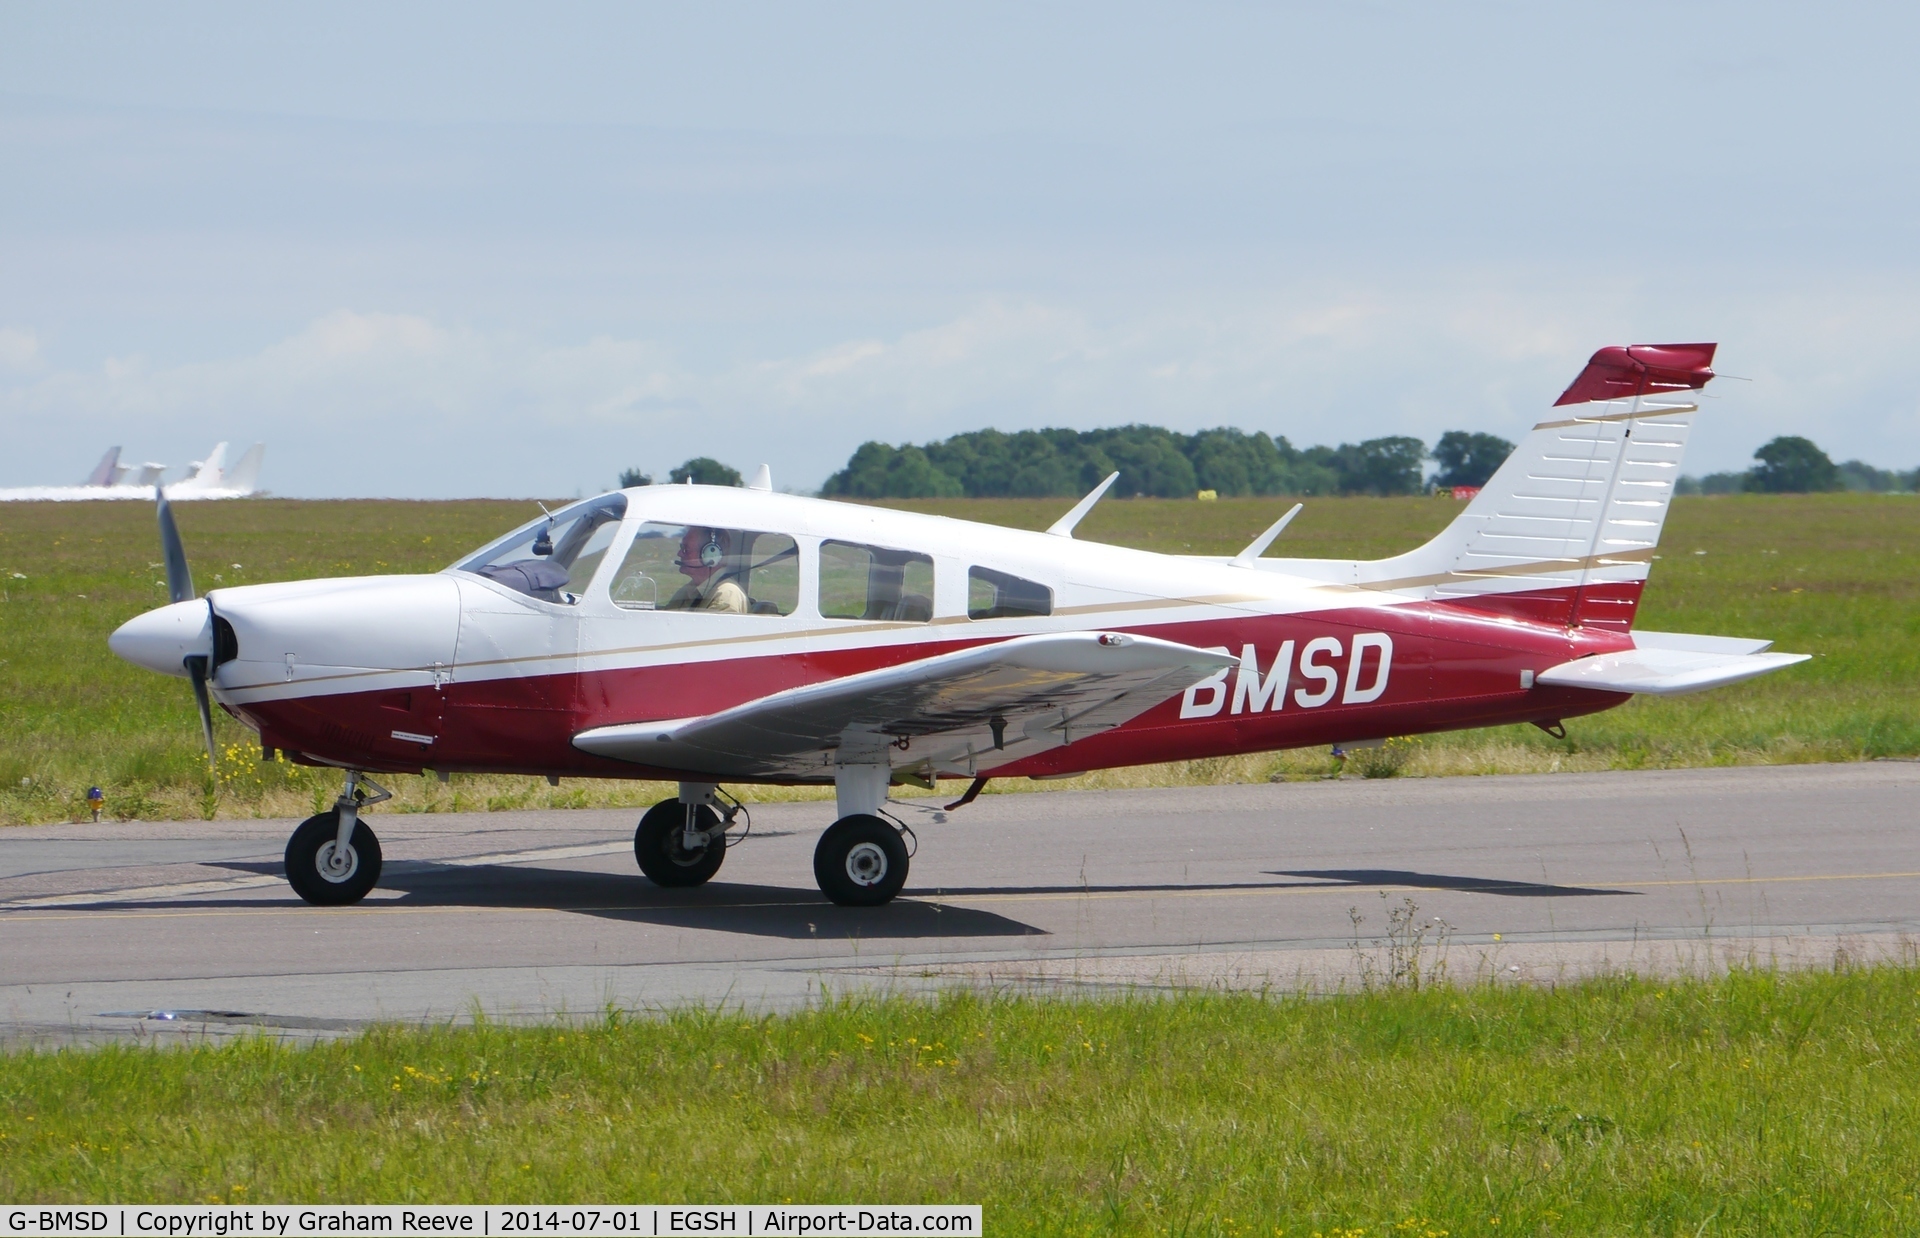 G-BMSD, 1976 Piper PA-28-181 Cherokee Archer II C/N 28-7690070, Just landed.